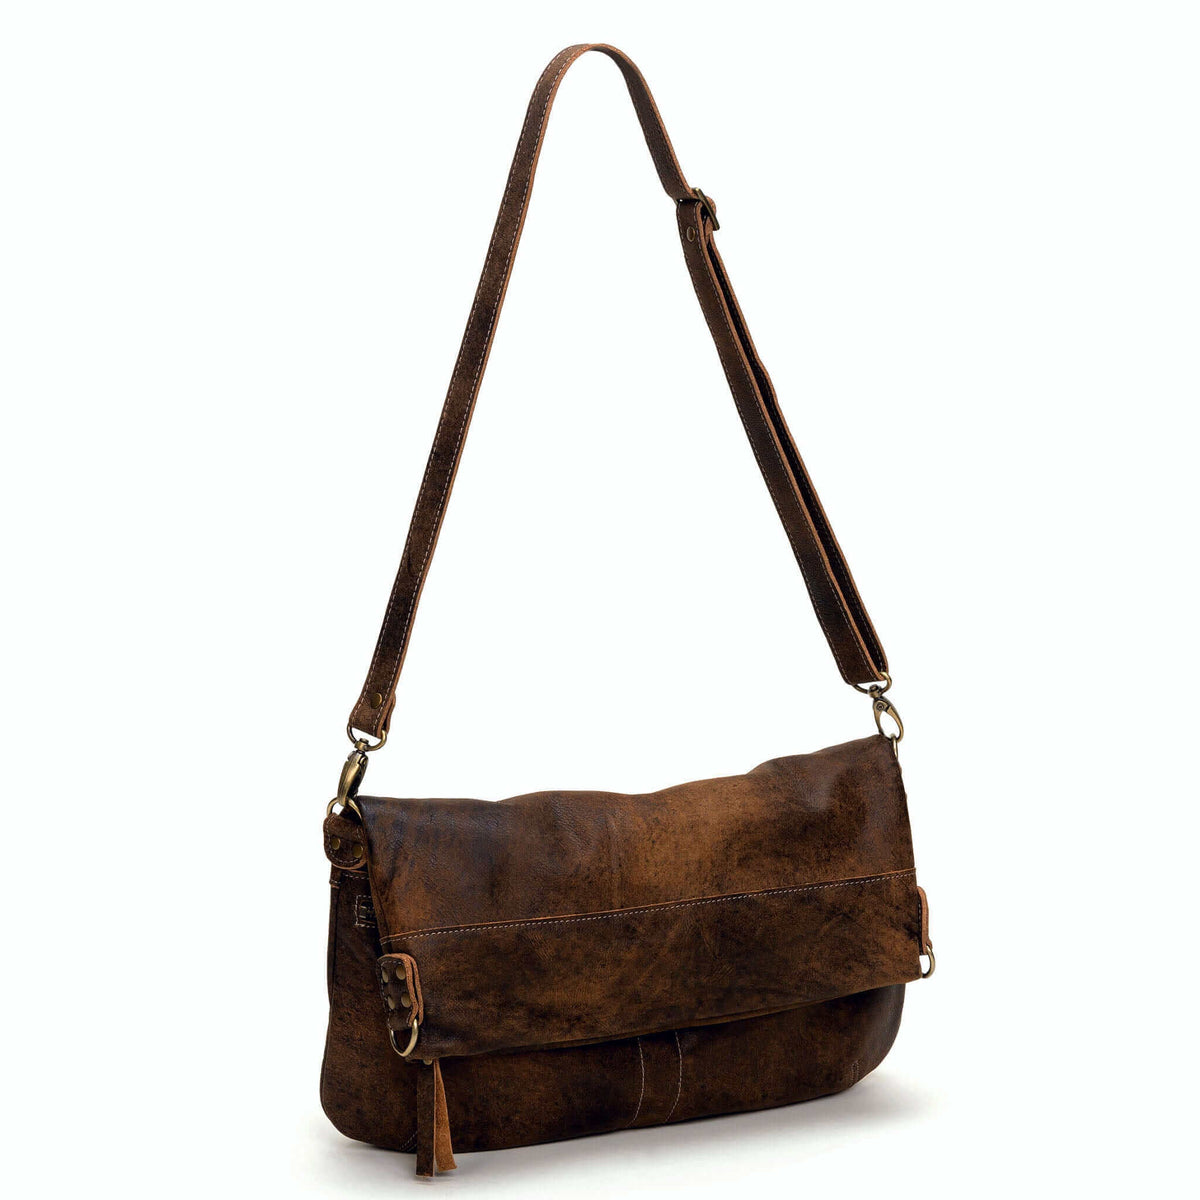 Bomber Brown 6-in-1 leather crossbody backpack - Brynn Capella, USA